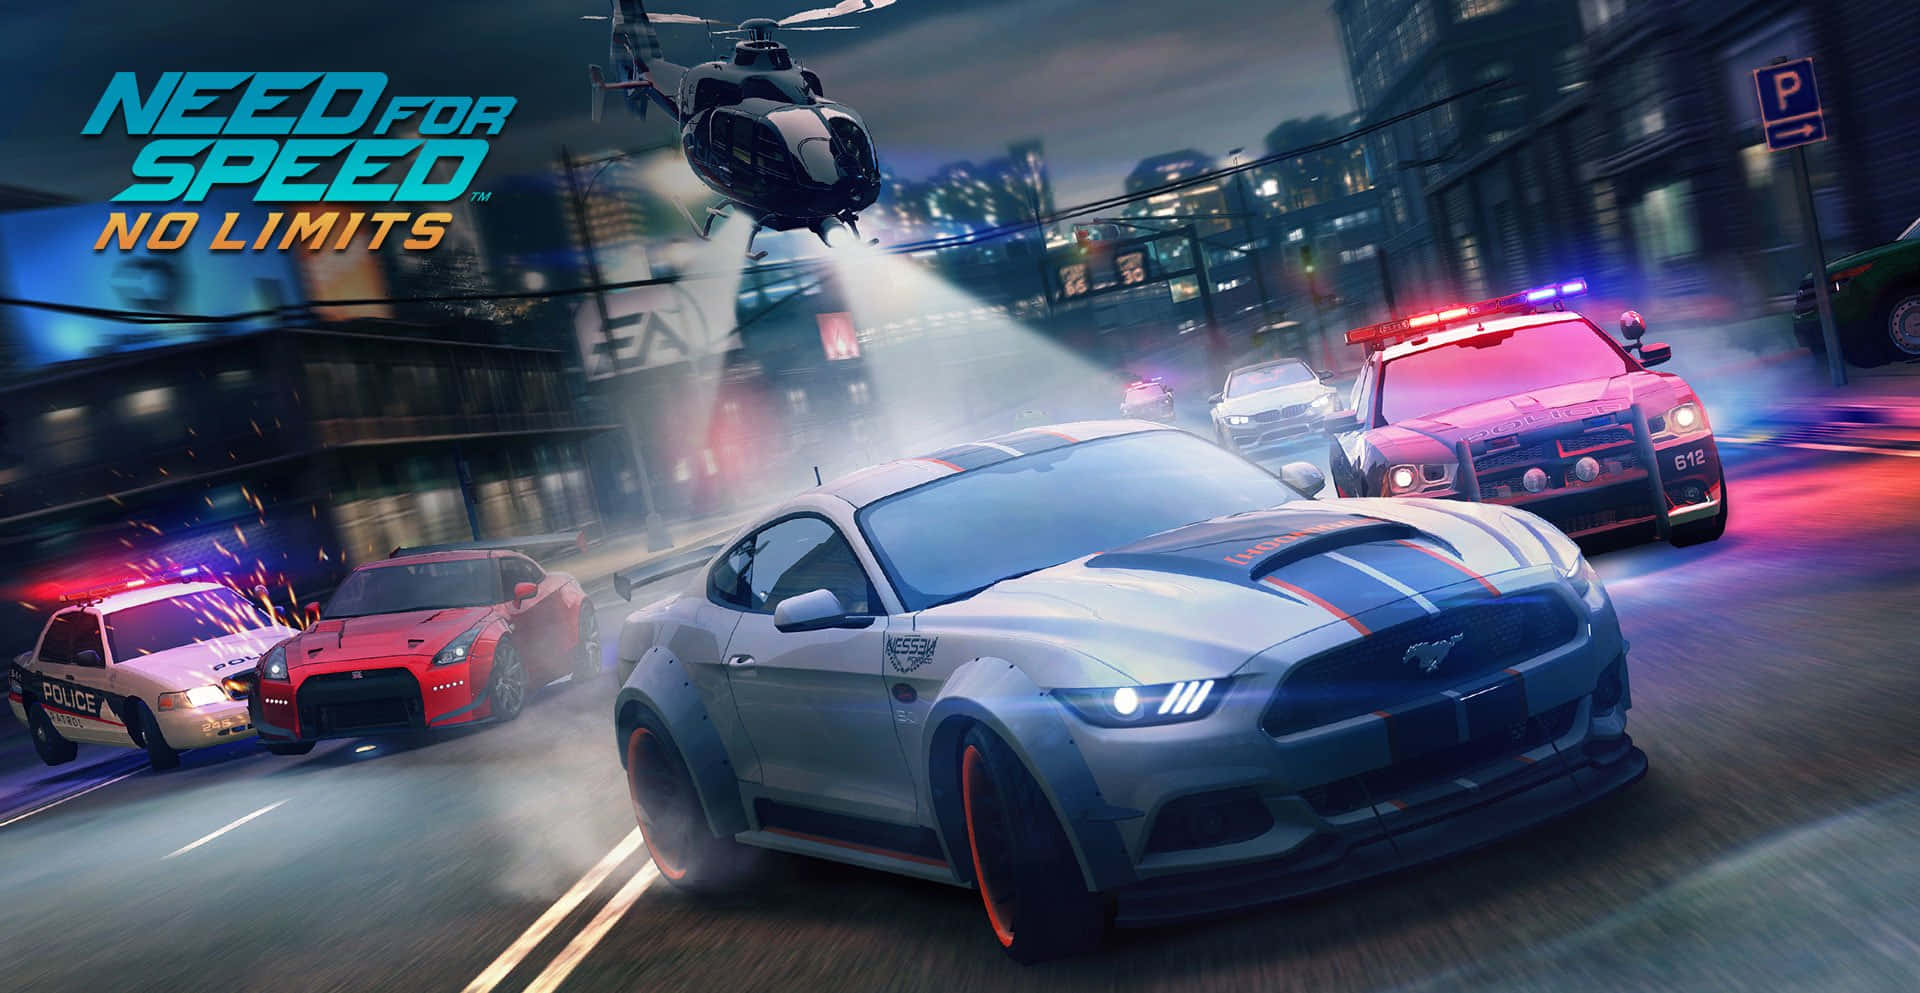 Need For Speed No Limits Screenshot